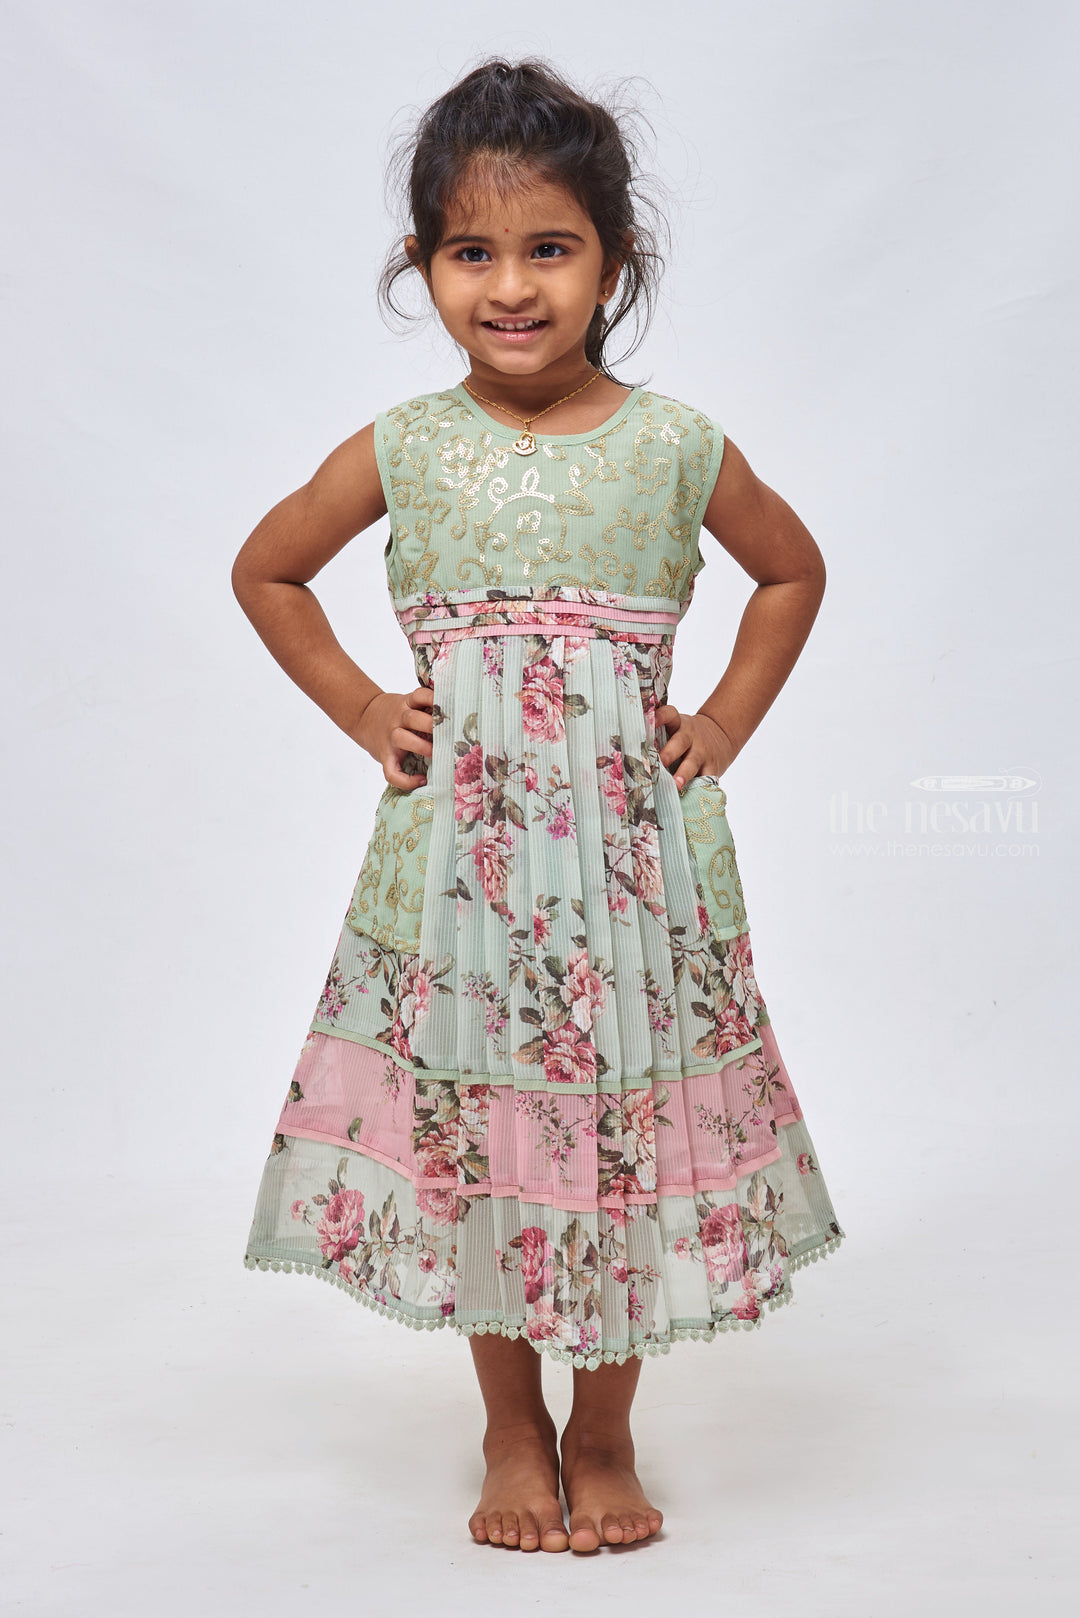 The Nesavu Girls Cotton Frock Green Gem: Sequin Embroidered Floral Printed Green Cotton Frock for Girls Nesavu 22 (4Y) / Green / Georgette GFC1157A-22 Cotton Frocks in Floral Designs for Girls | Fancy Cotton Frocks for Special Occasions | The Nesavu